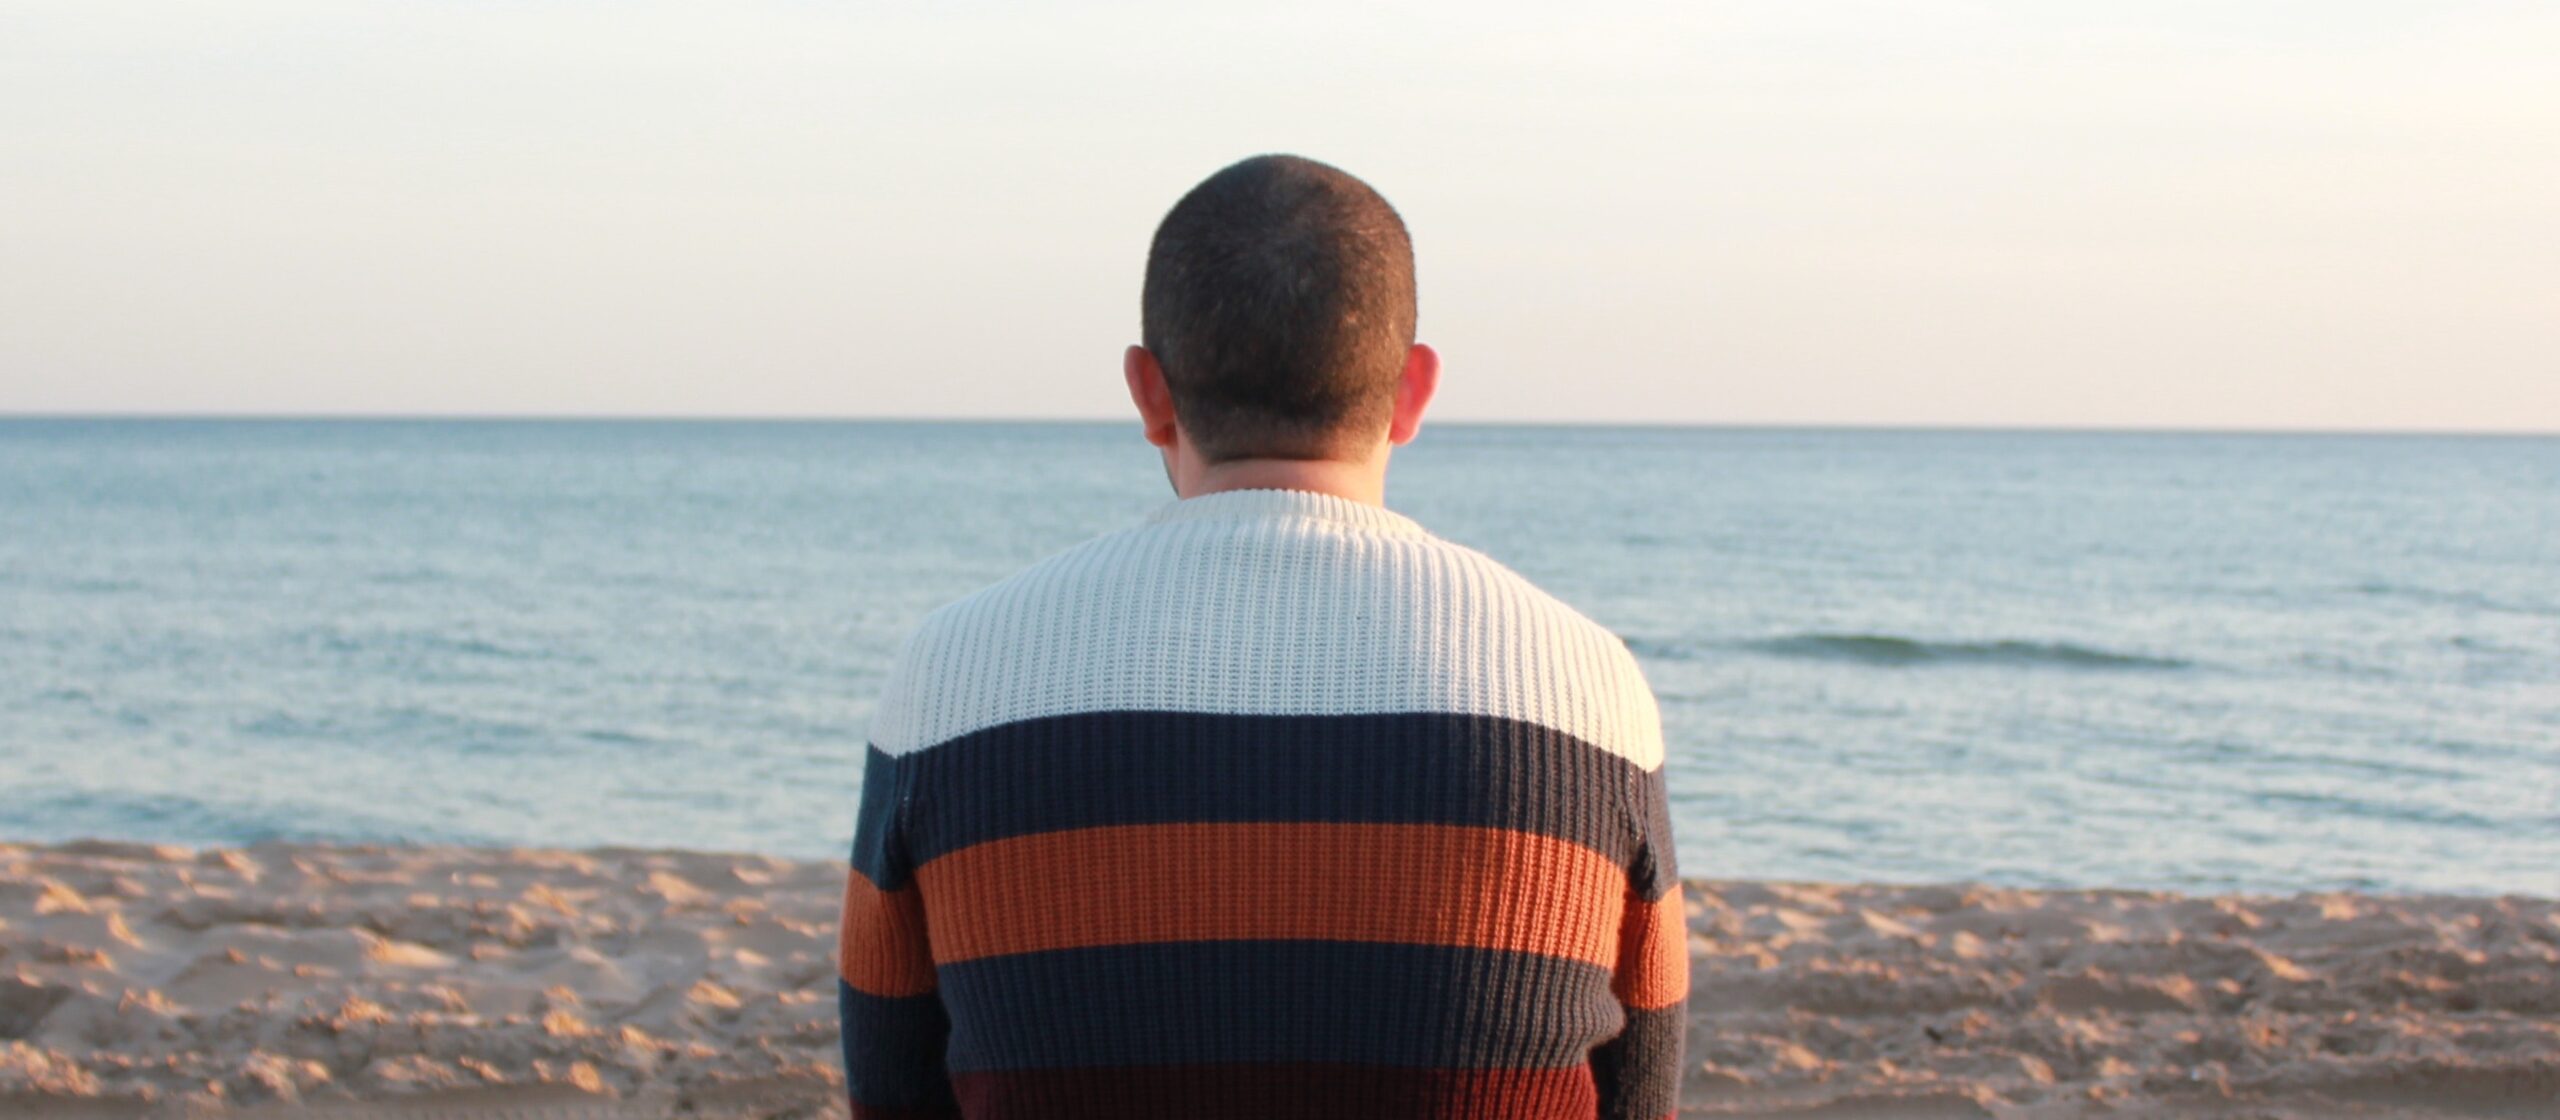 A man looks out at the ocean representing tapering off klonopin.